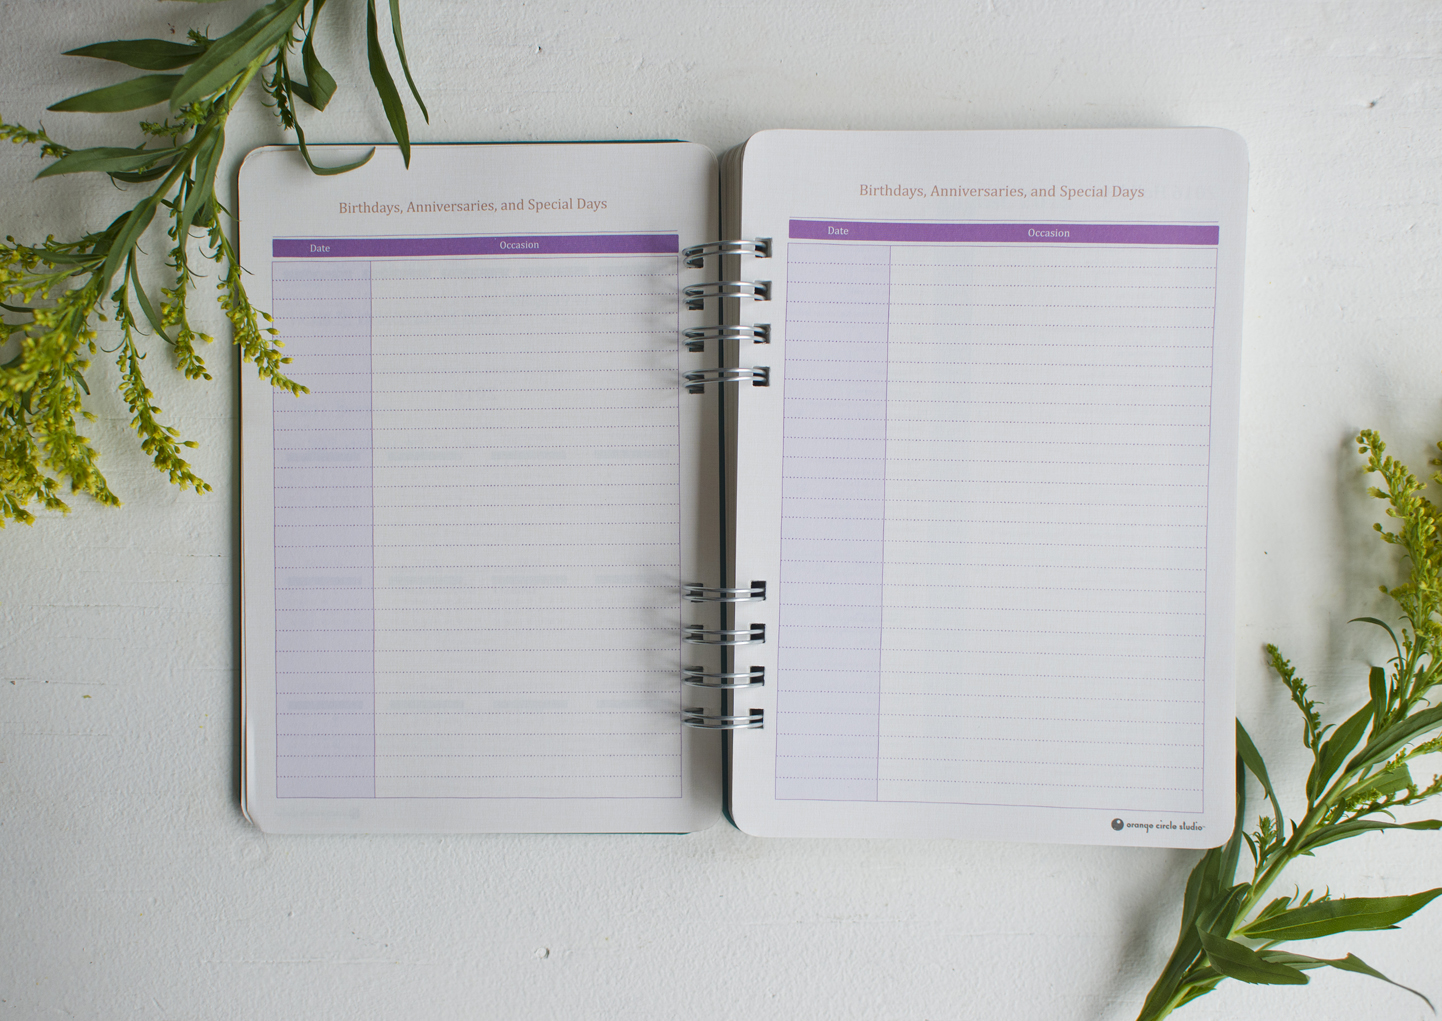 Becca Cahan for Studio Oh! // "Live Love Laugh" Weekly Planner 2015-2016 Planner